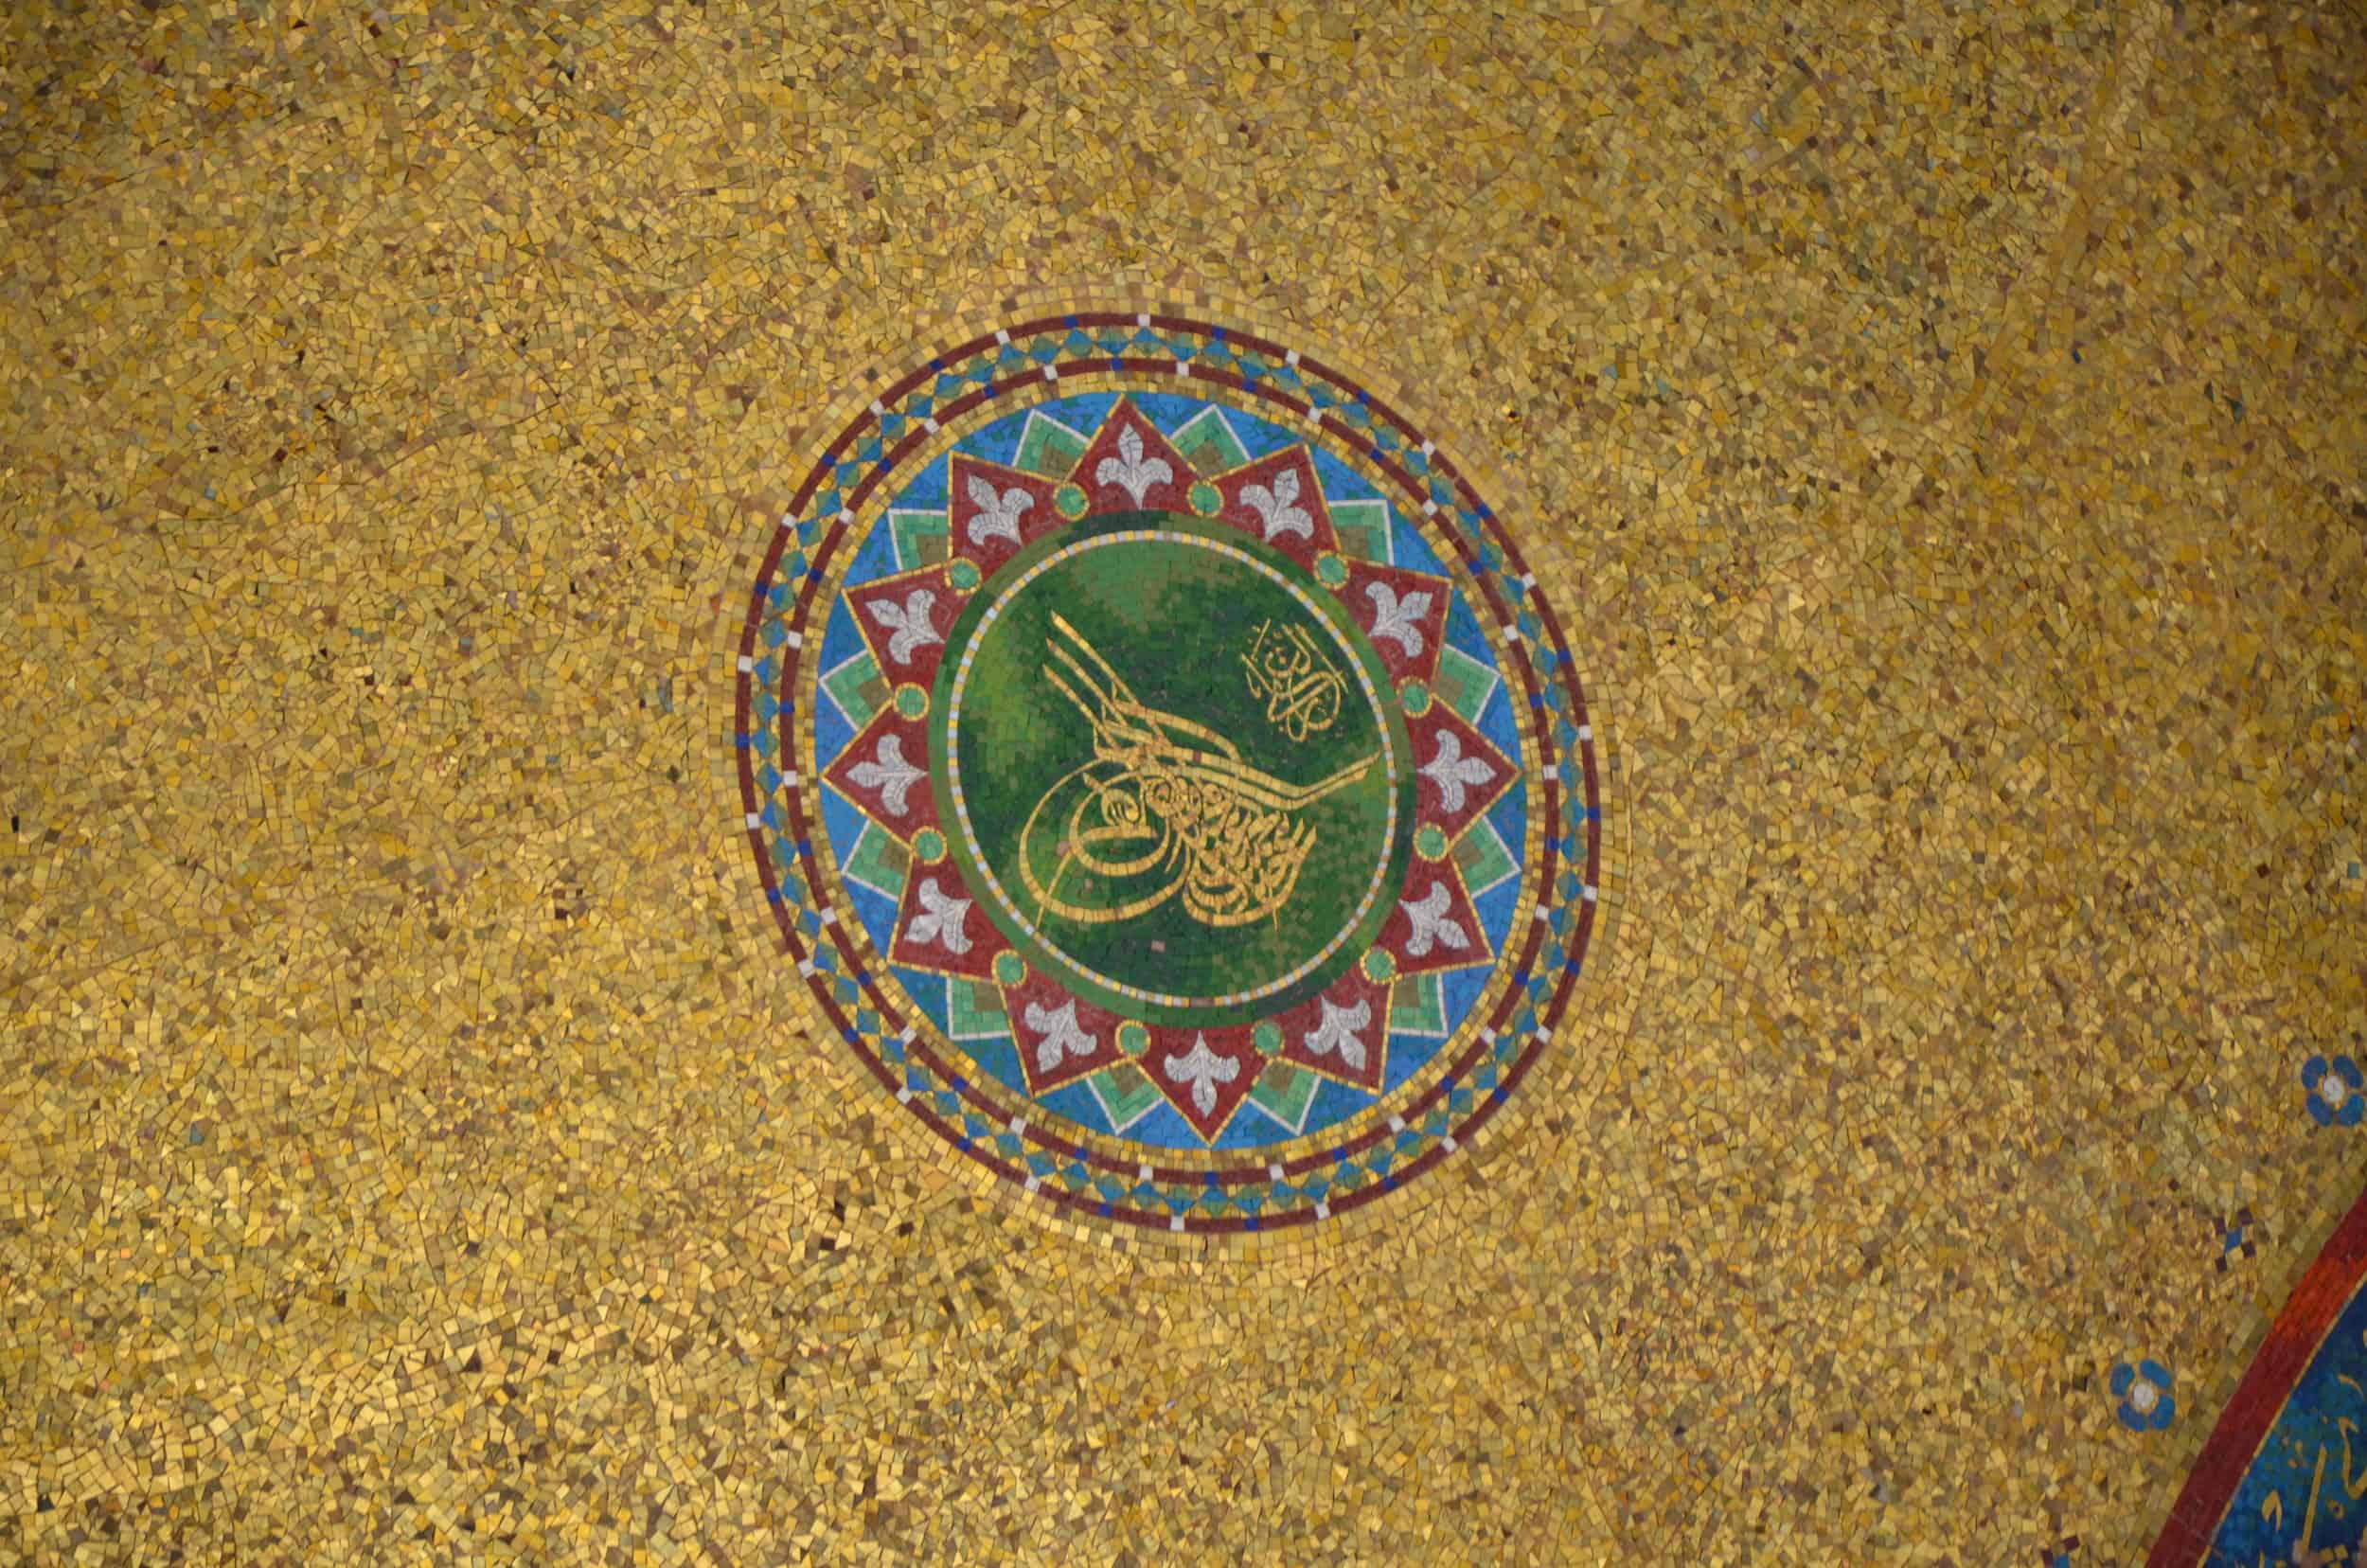 Mosaic under the dome